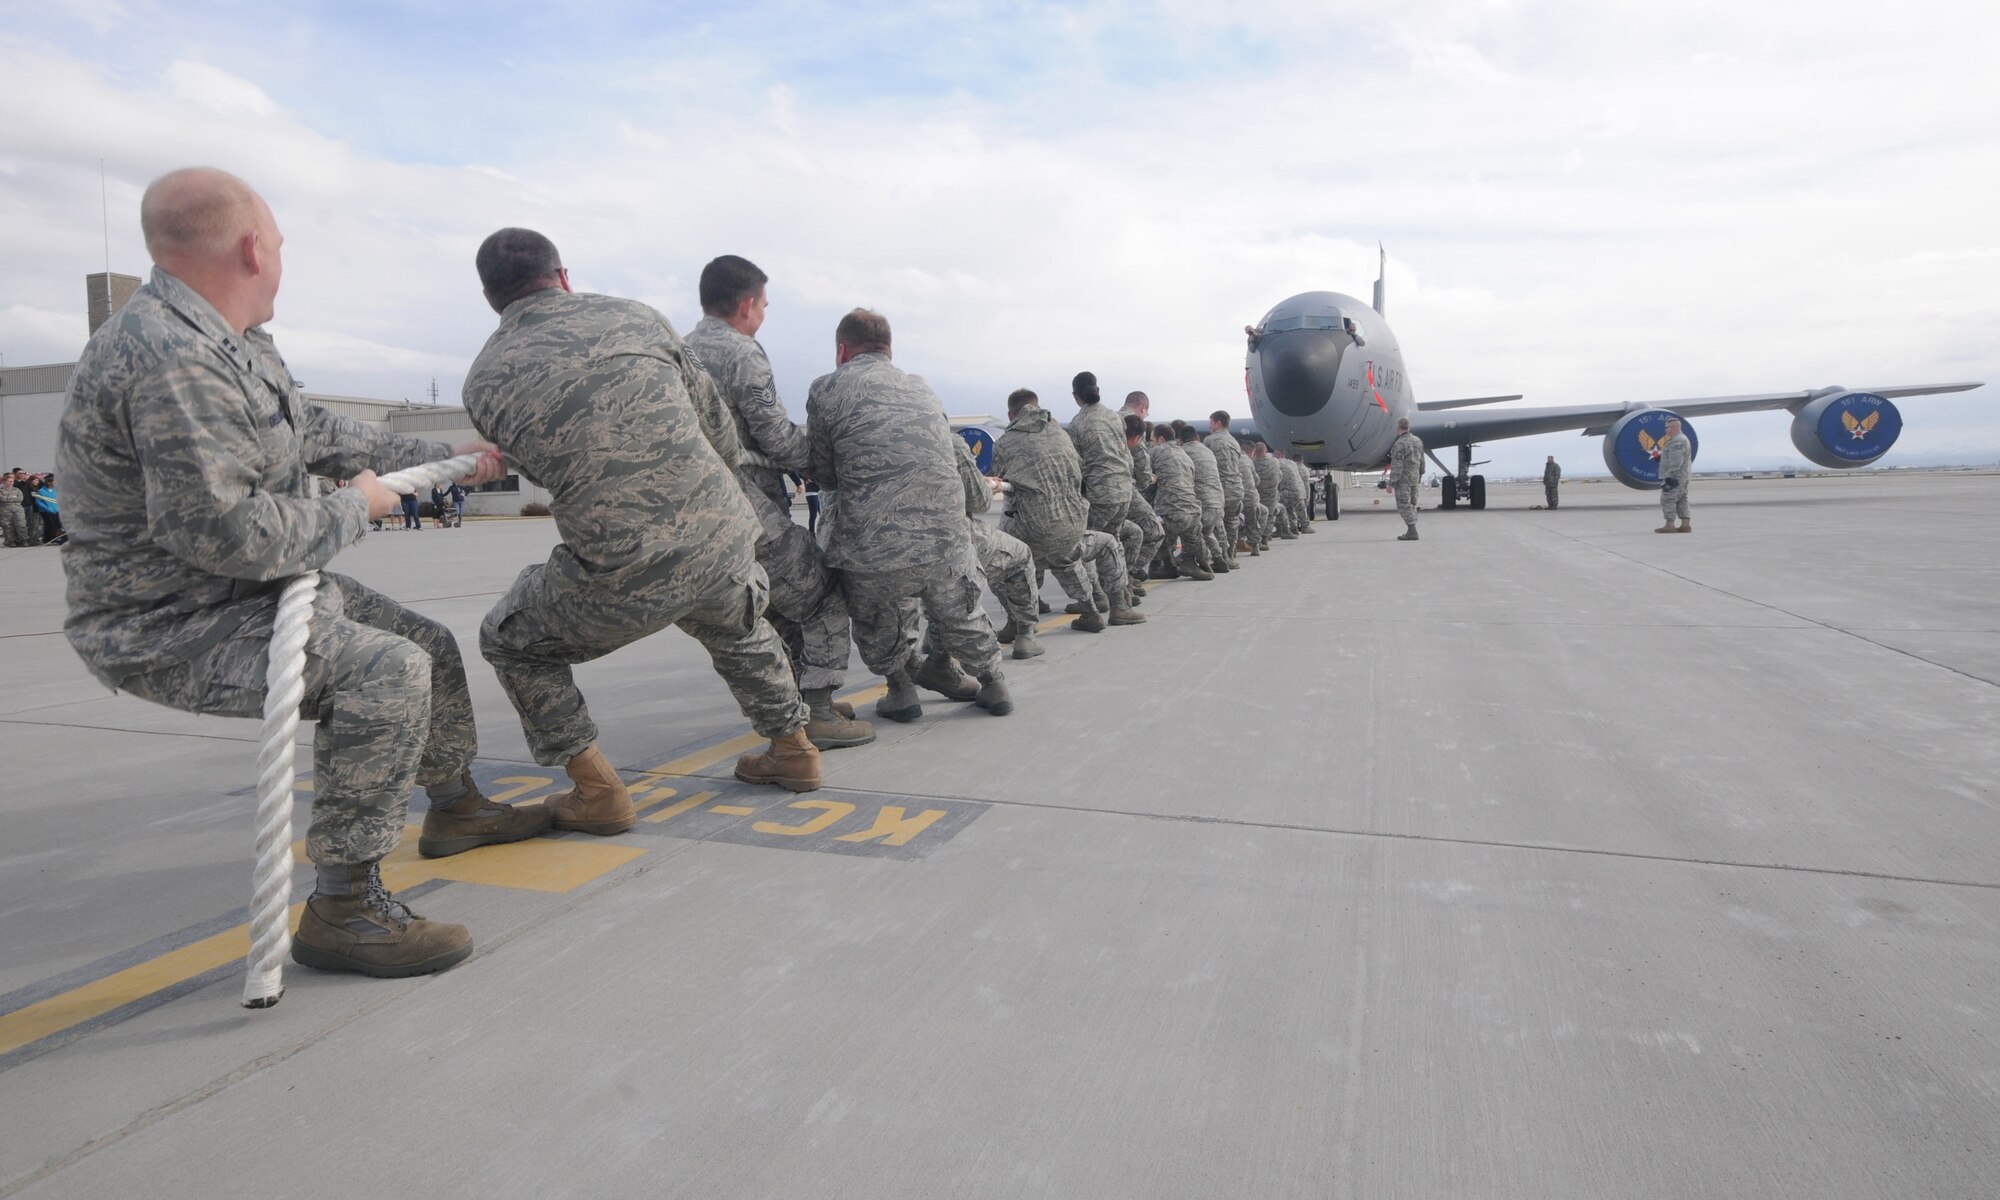 Members of the 151st Air Refueling Wing pull a KC-135 Stratotanker in a" Plane-Pull" competition as part of Winter Wingman Day, March 12, 2011, at the Utah Air National Guard base in Salt Lake City. Teams competed to see who could pull the 120,00+ pound aircraft over a 40 feet distance in the shortest time. (U.S. Air Force photo by Master Sgt. Gary J. Rihn)(RELEASED)